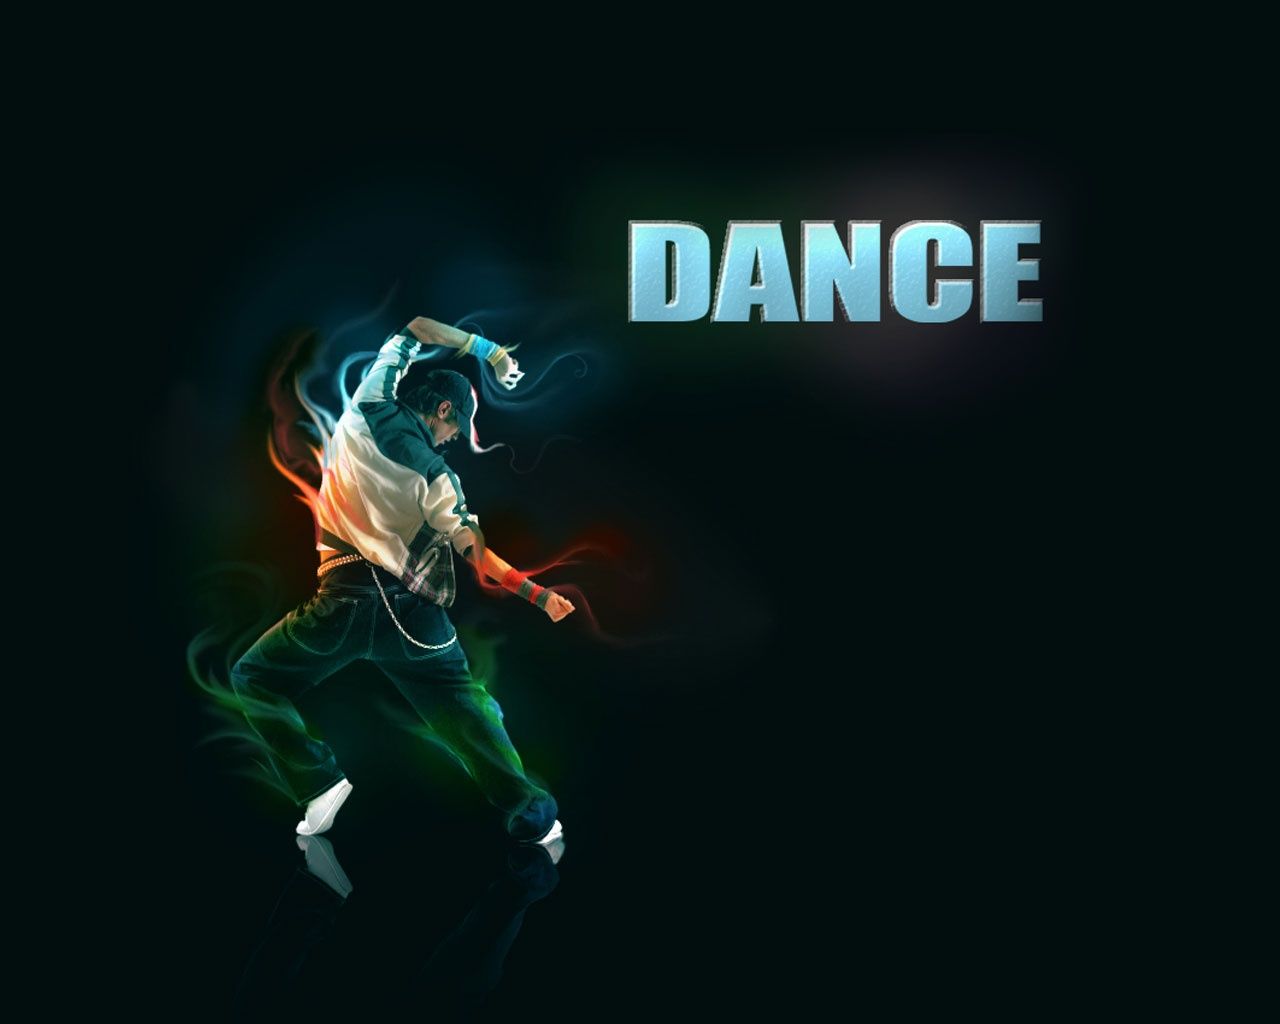 1280x1024 Dance Maniacs wallpaper, music and dance wallpapers